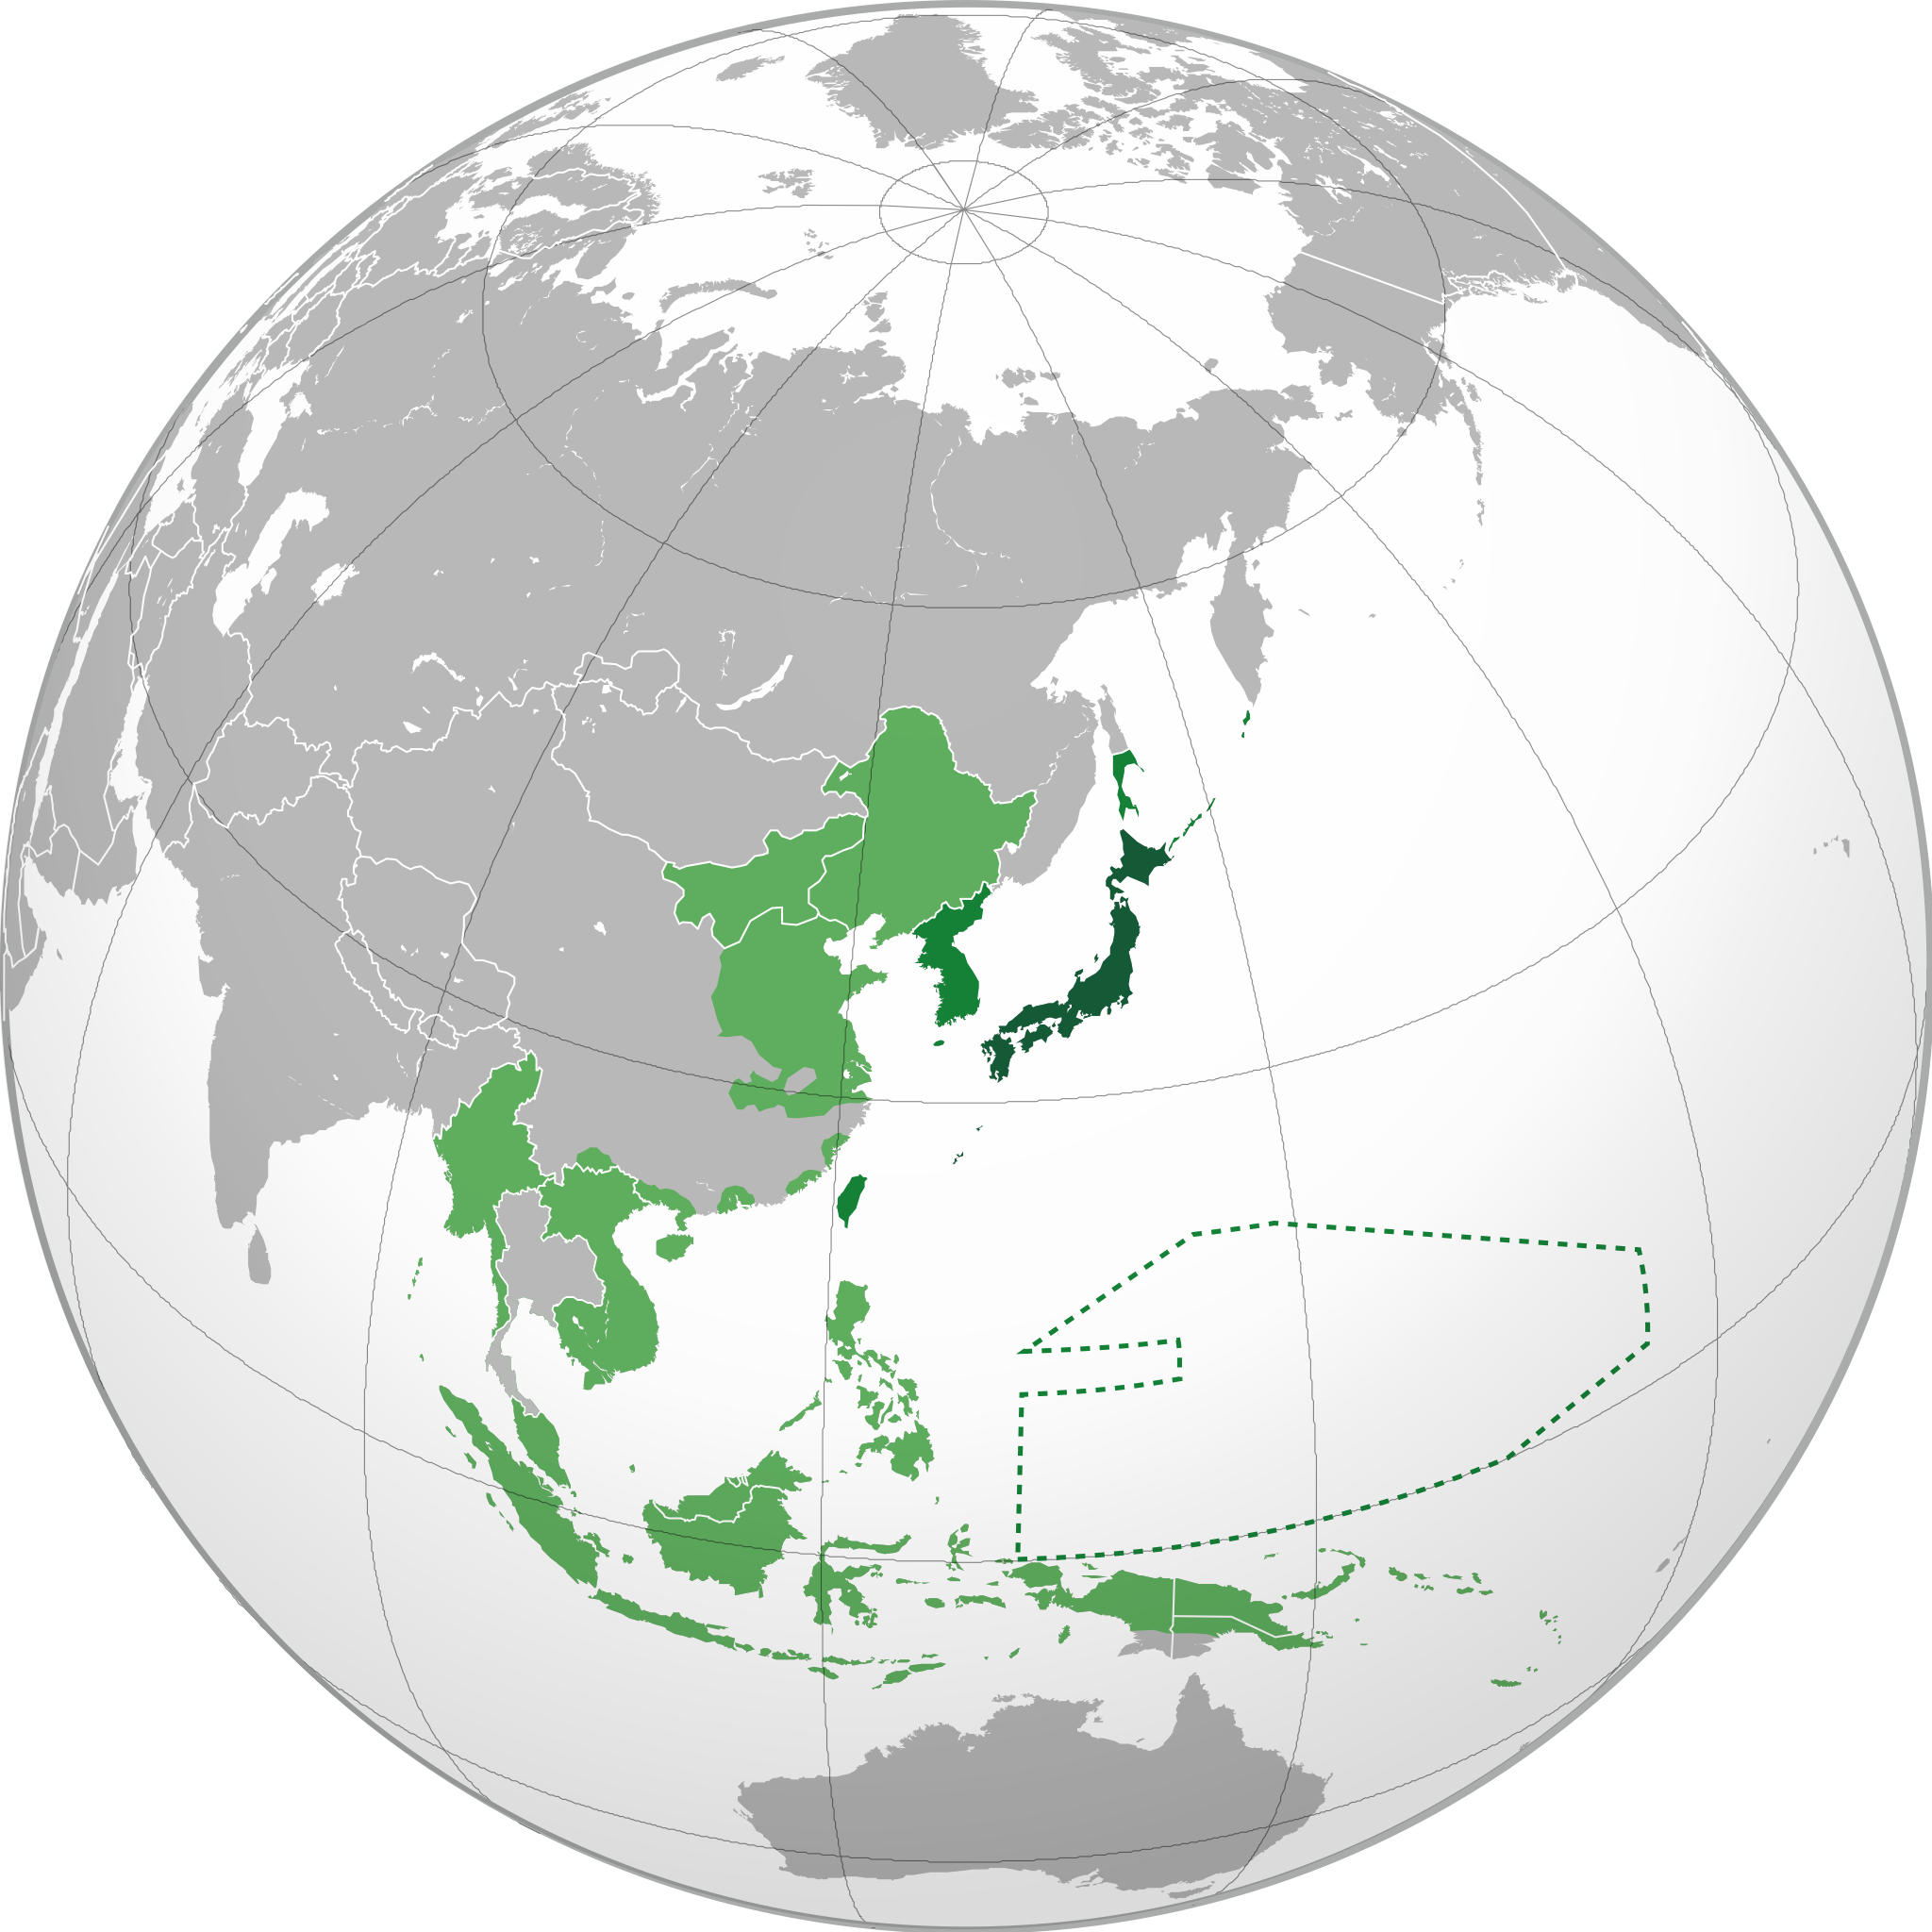 File:Imperial Japan map.png